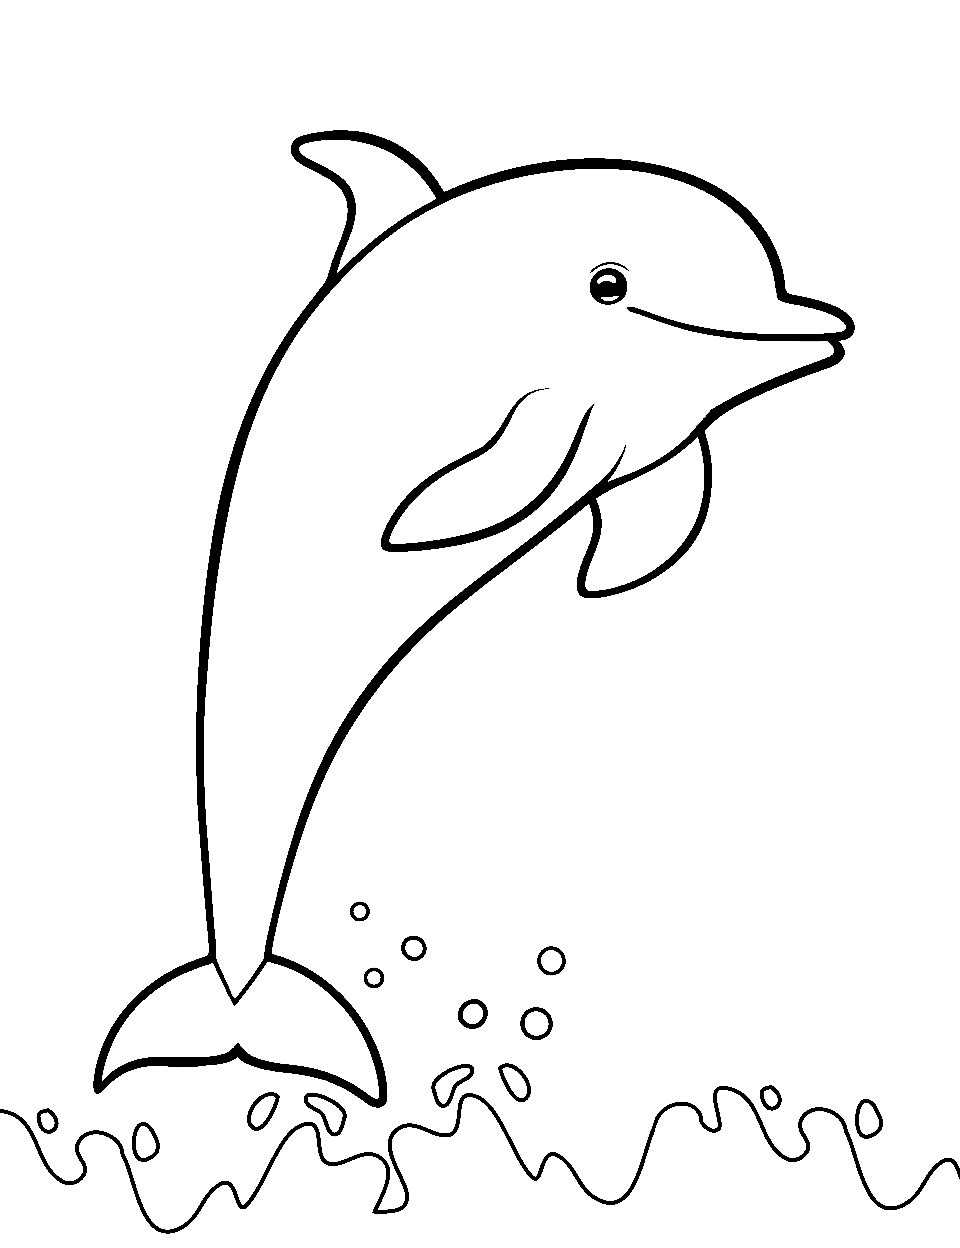 Easy Dolphin for Beginners Coloring Page - A basic, easy-to-color dolphin for beginner colorists, gliding through light, welcoming waves.